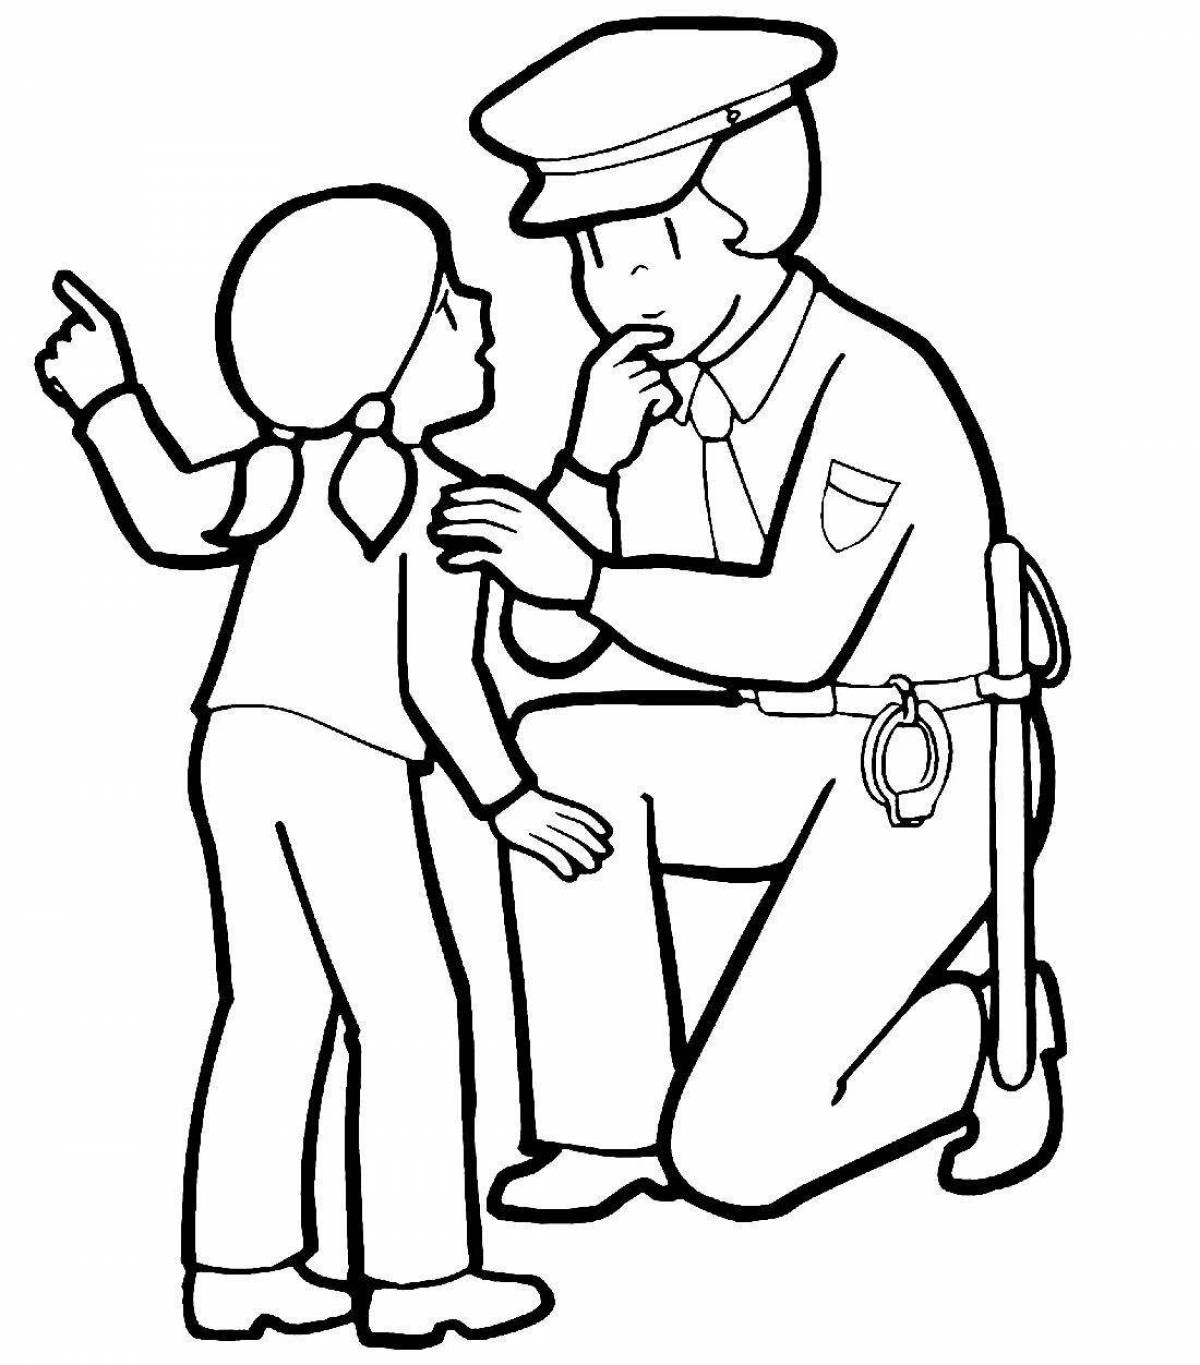 Radiant coloring page police figure